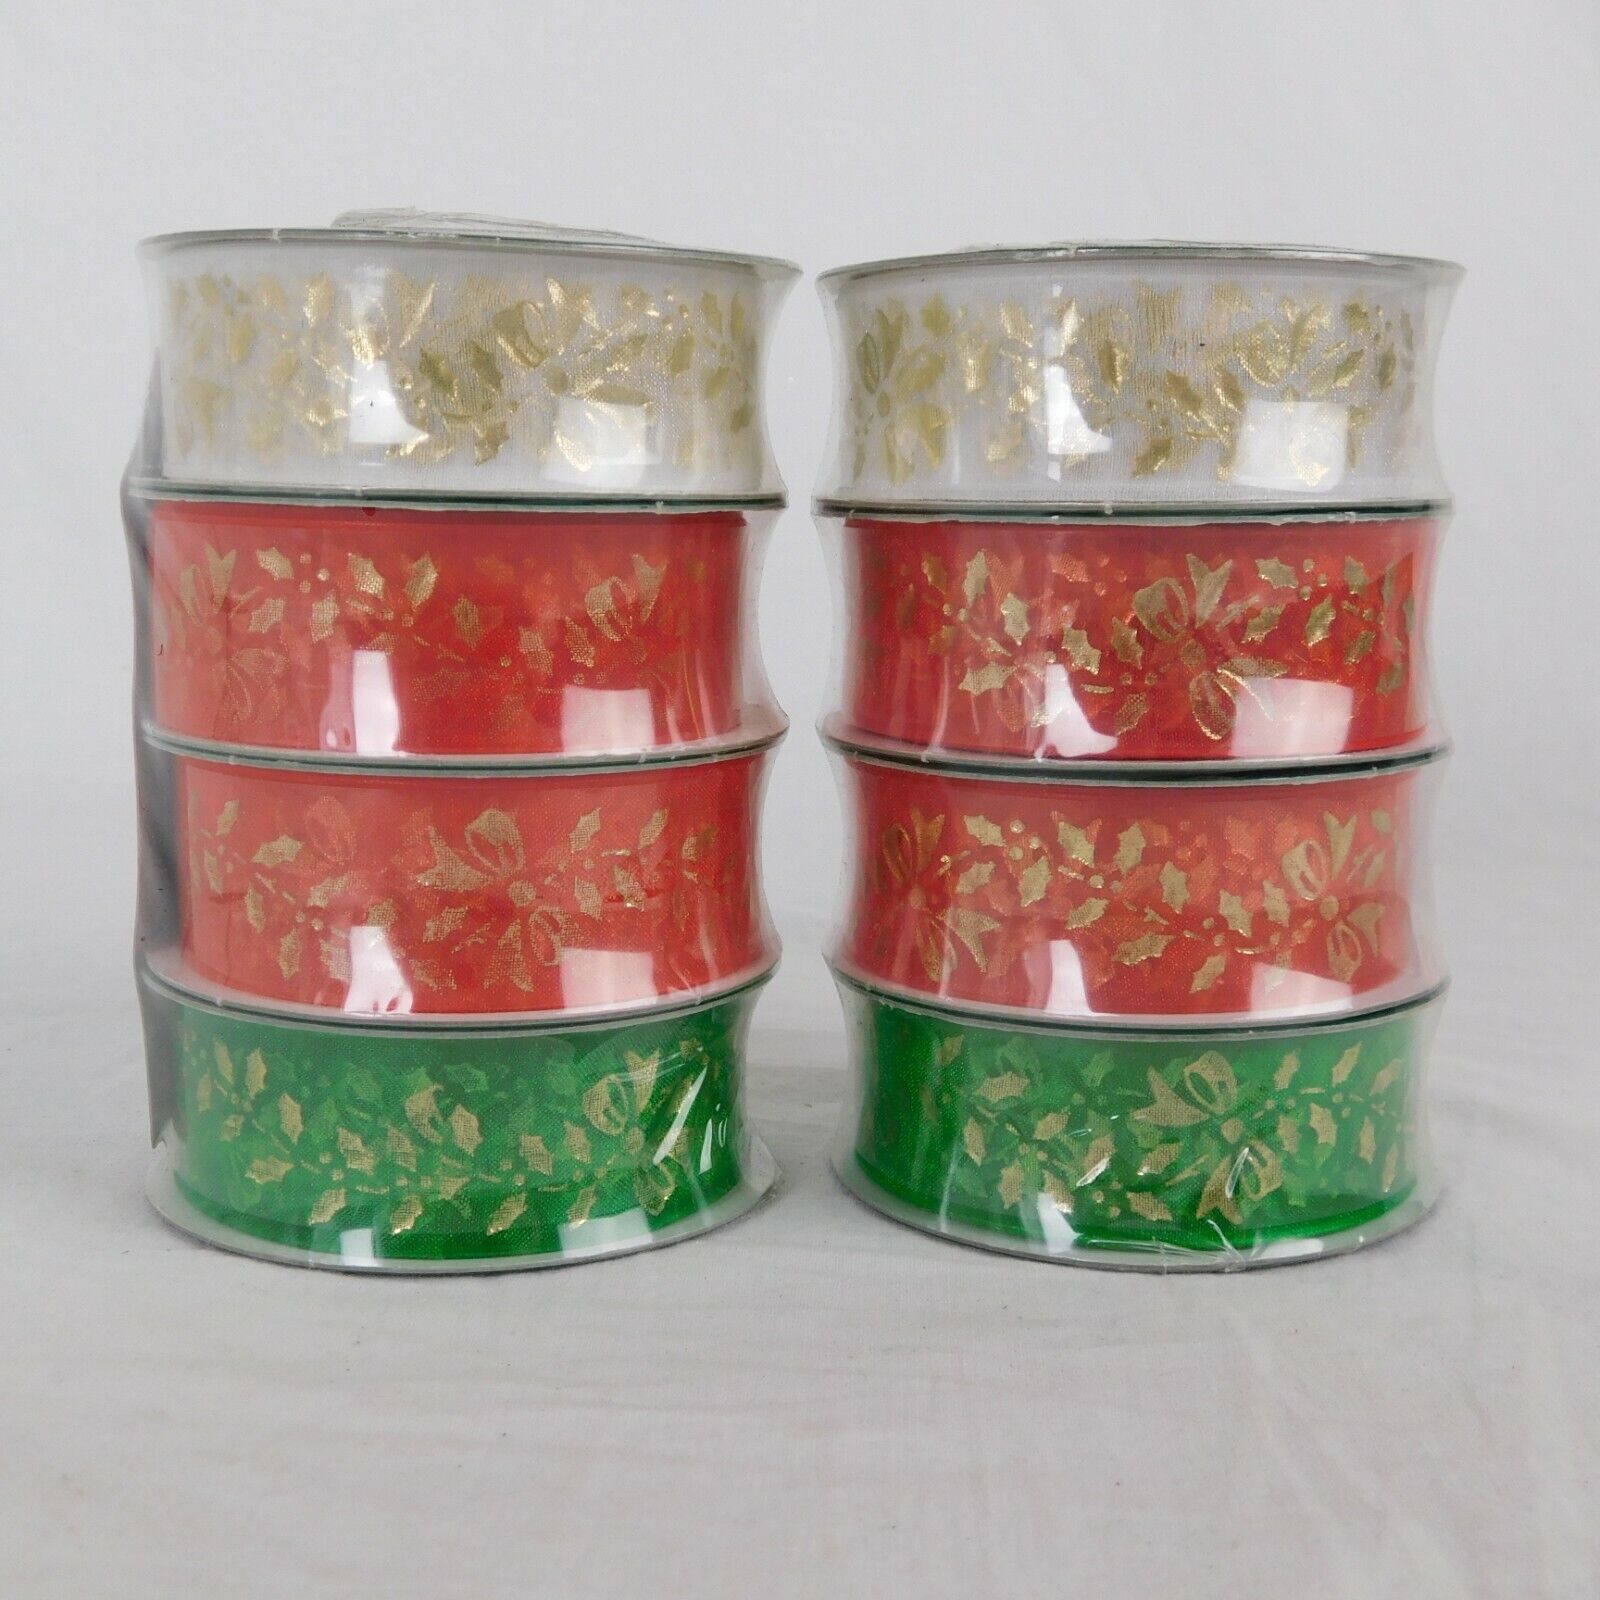 Sheer Fabric Ribbon Value Pack Lot of 2 Green, Red, White Christmas Gold Printed - $7.85